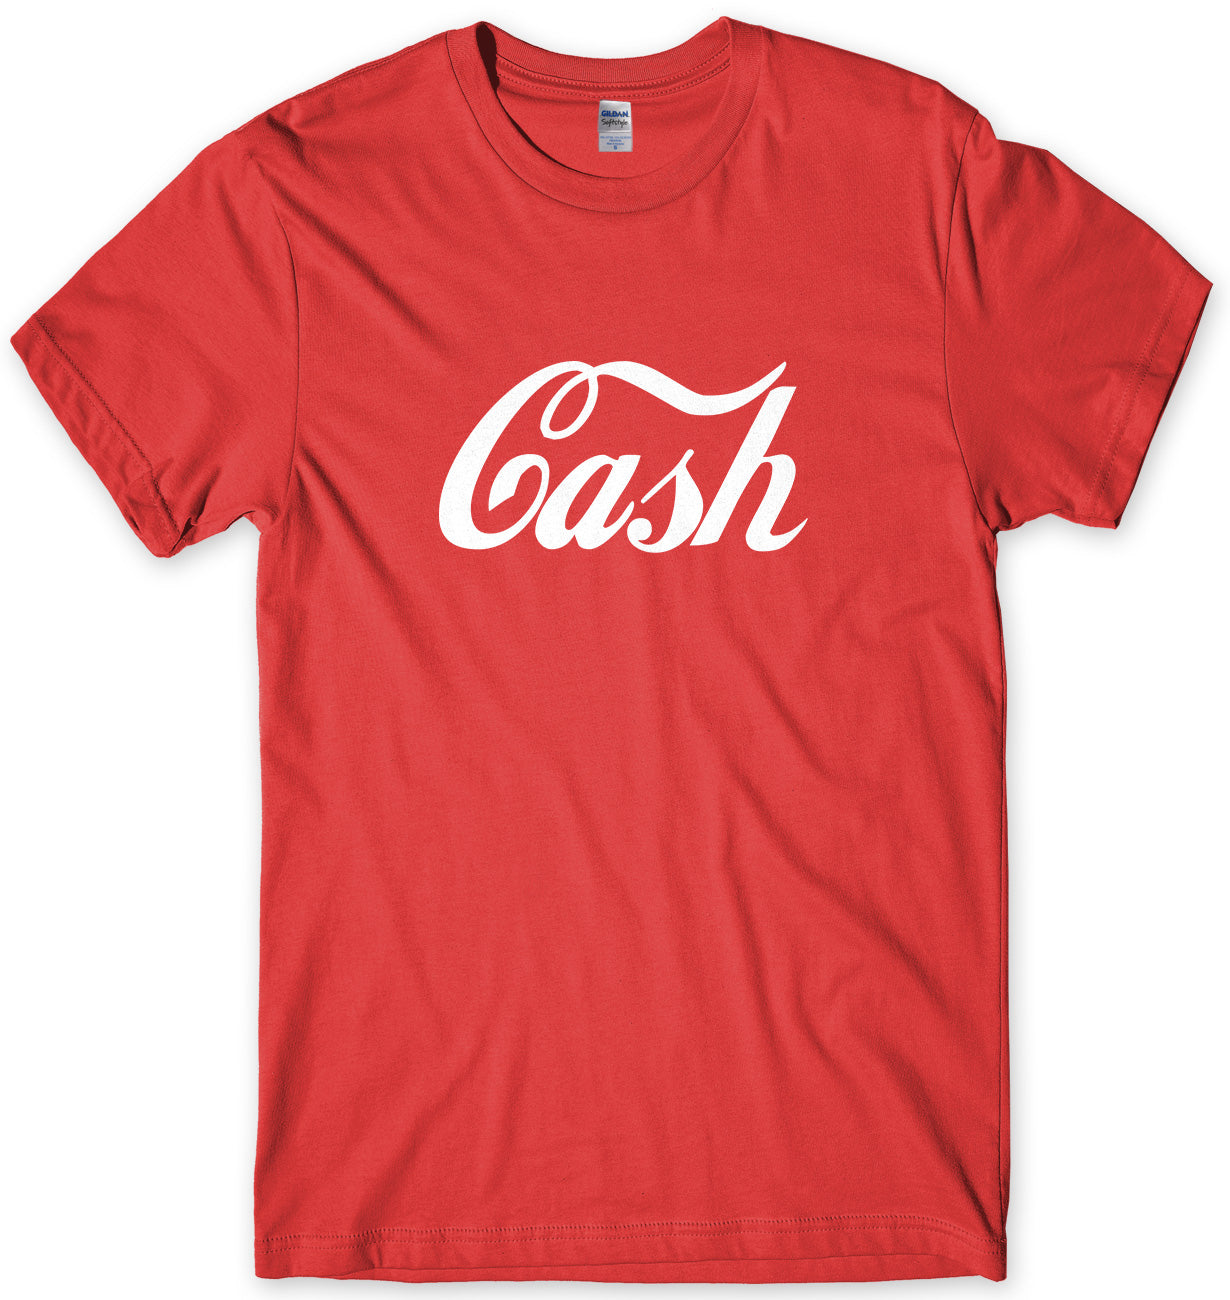 CASH - AS WORN BY JACK WHITE MENS UNISEX T-SHIRT